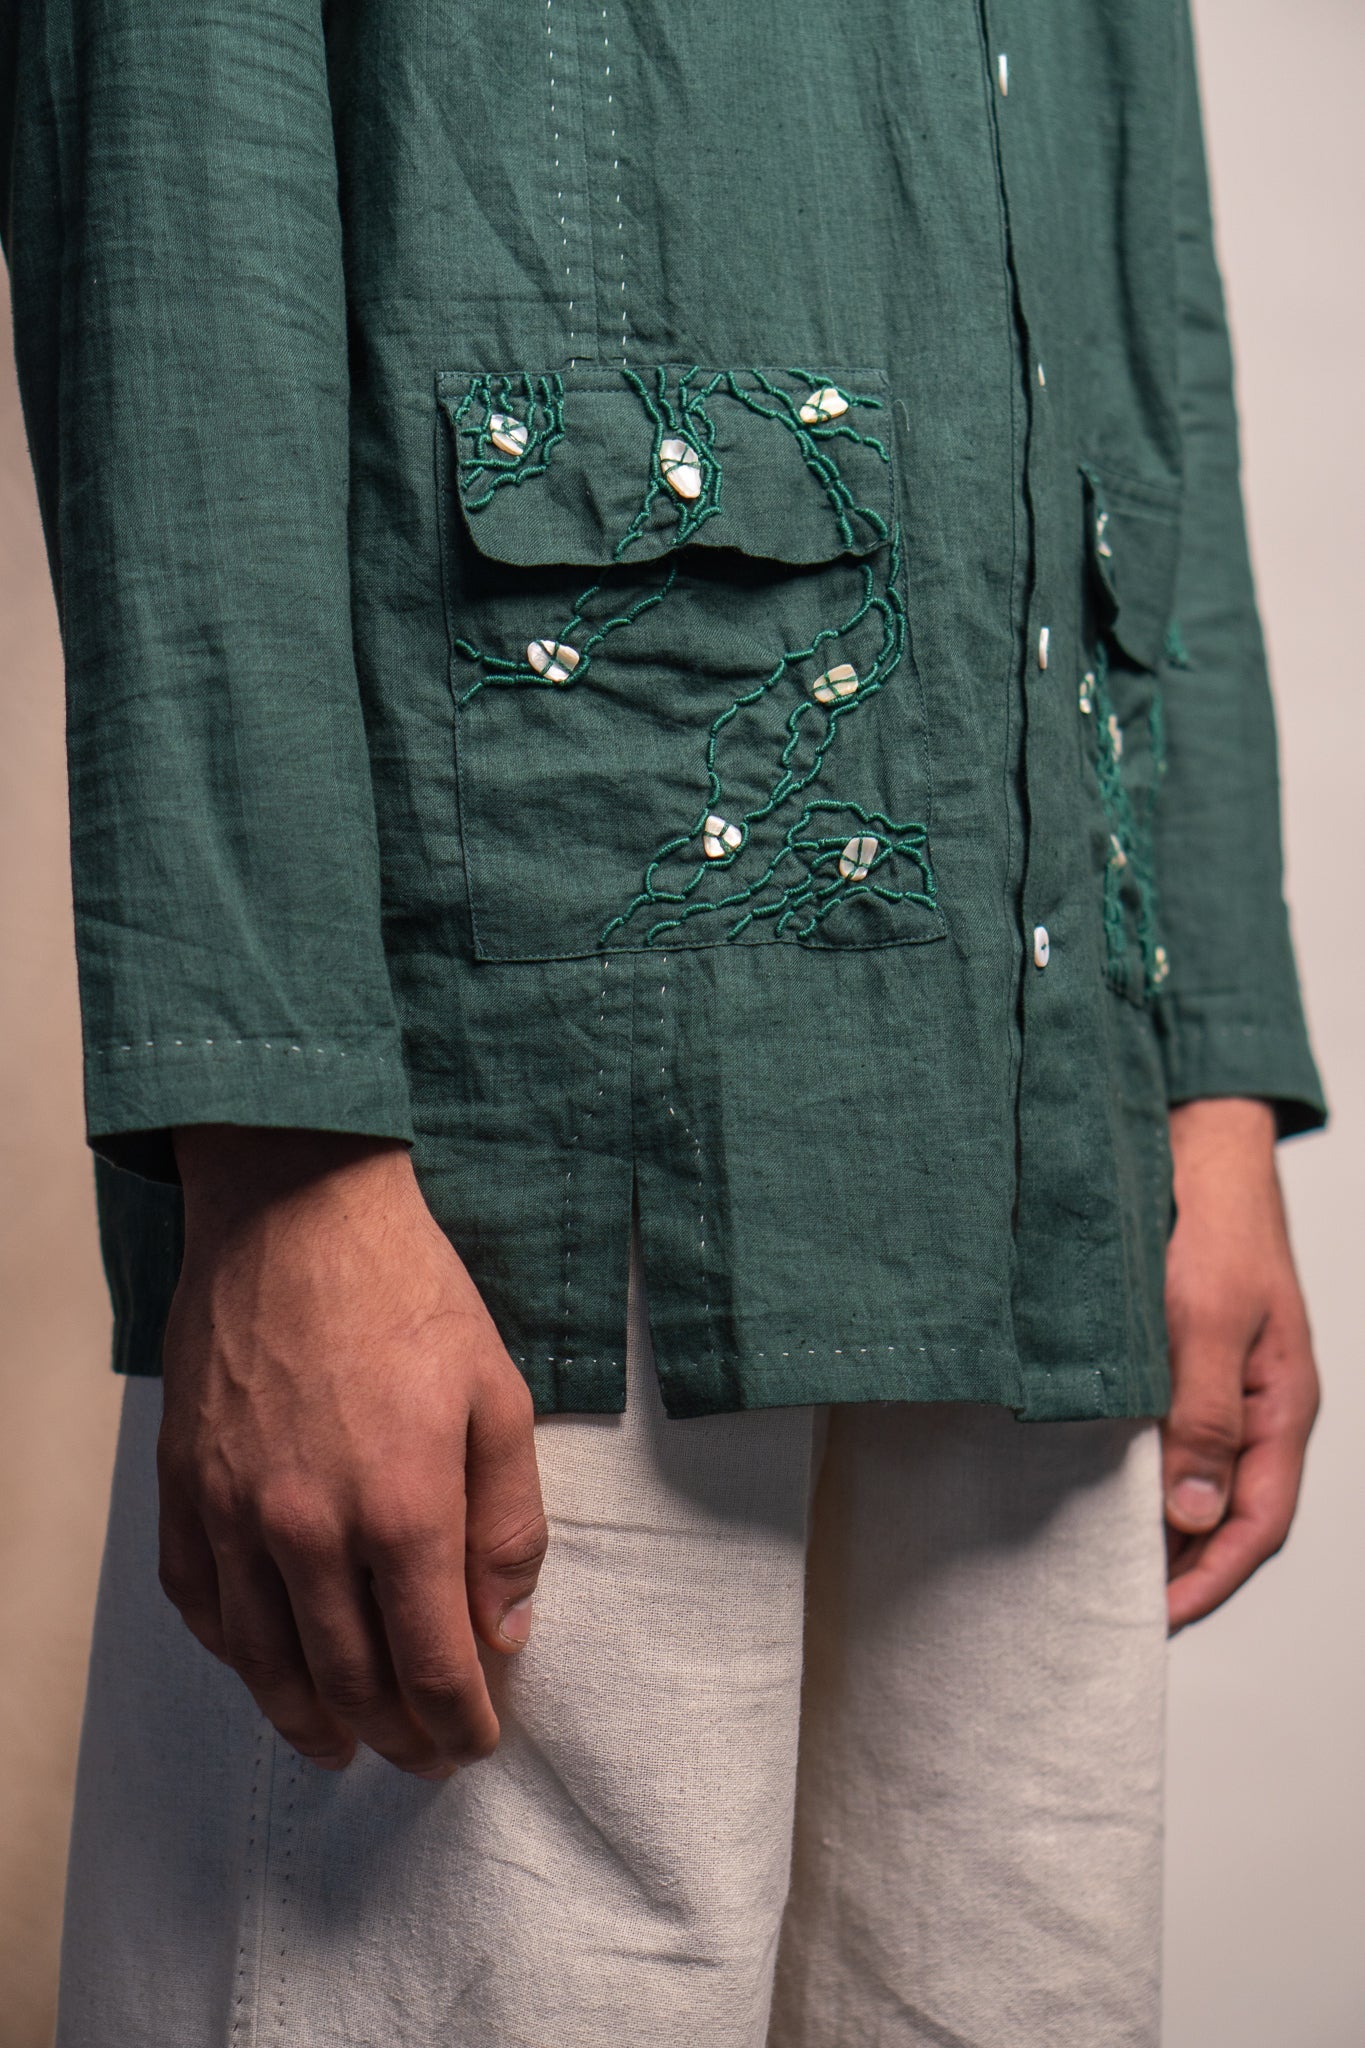 Green Panelled Shirt at Kamakhyaa by Lafaani. This item is 100% pure cotton, Casual Wear, Green, Menswear, Natural with azo free dyes, Organic, Regular Fit, Rewind, Shirts, Solids